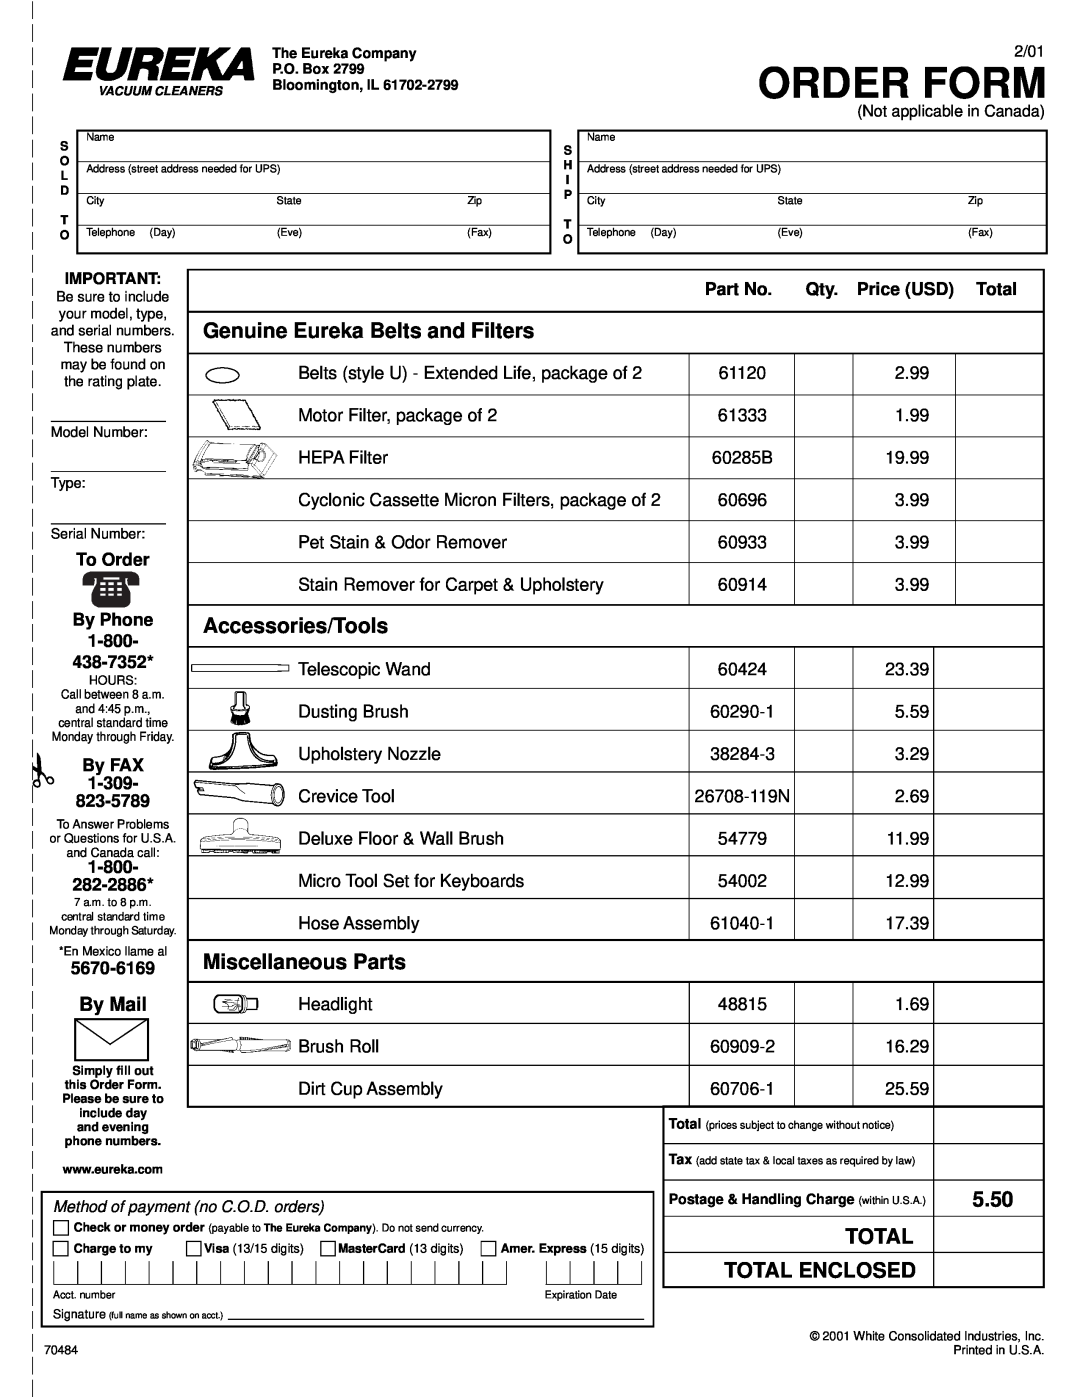 Eureka 4500 Order Form, Genuine Eureka Belts and Filters, Accessories/Tools, Miscellaneous Parts, 5.50, Total, By Mail 